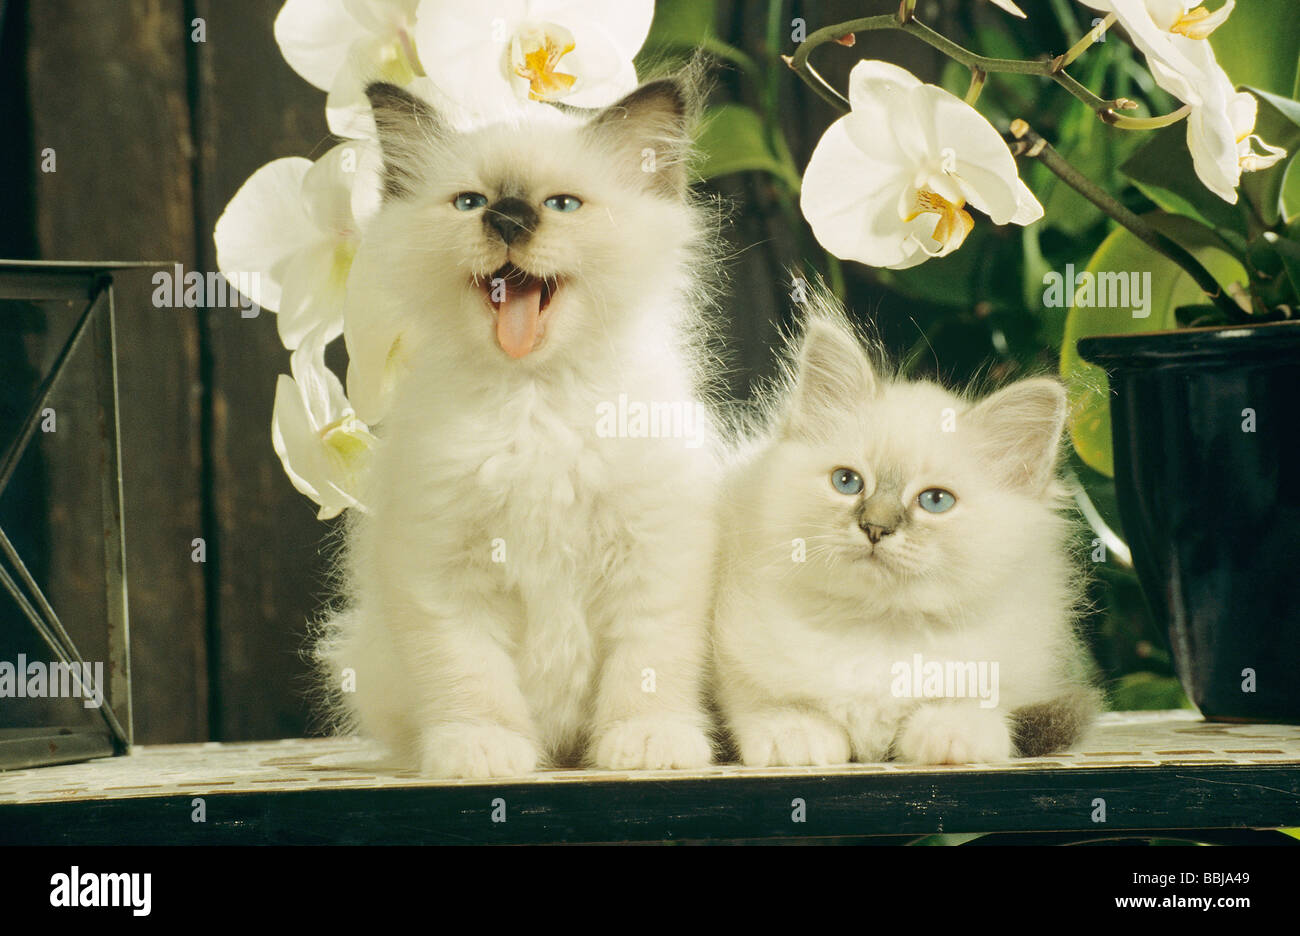 Sacred cat of Burma - two kittens in front of orchids Stock Photo